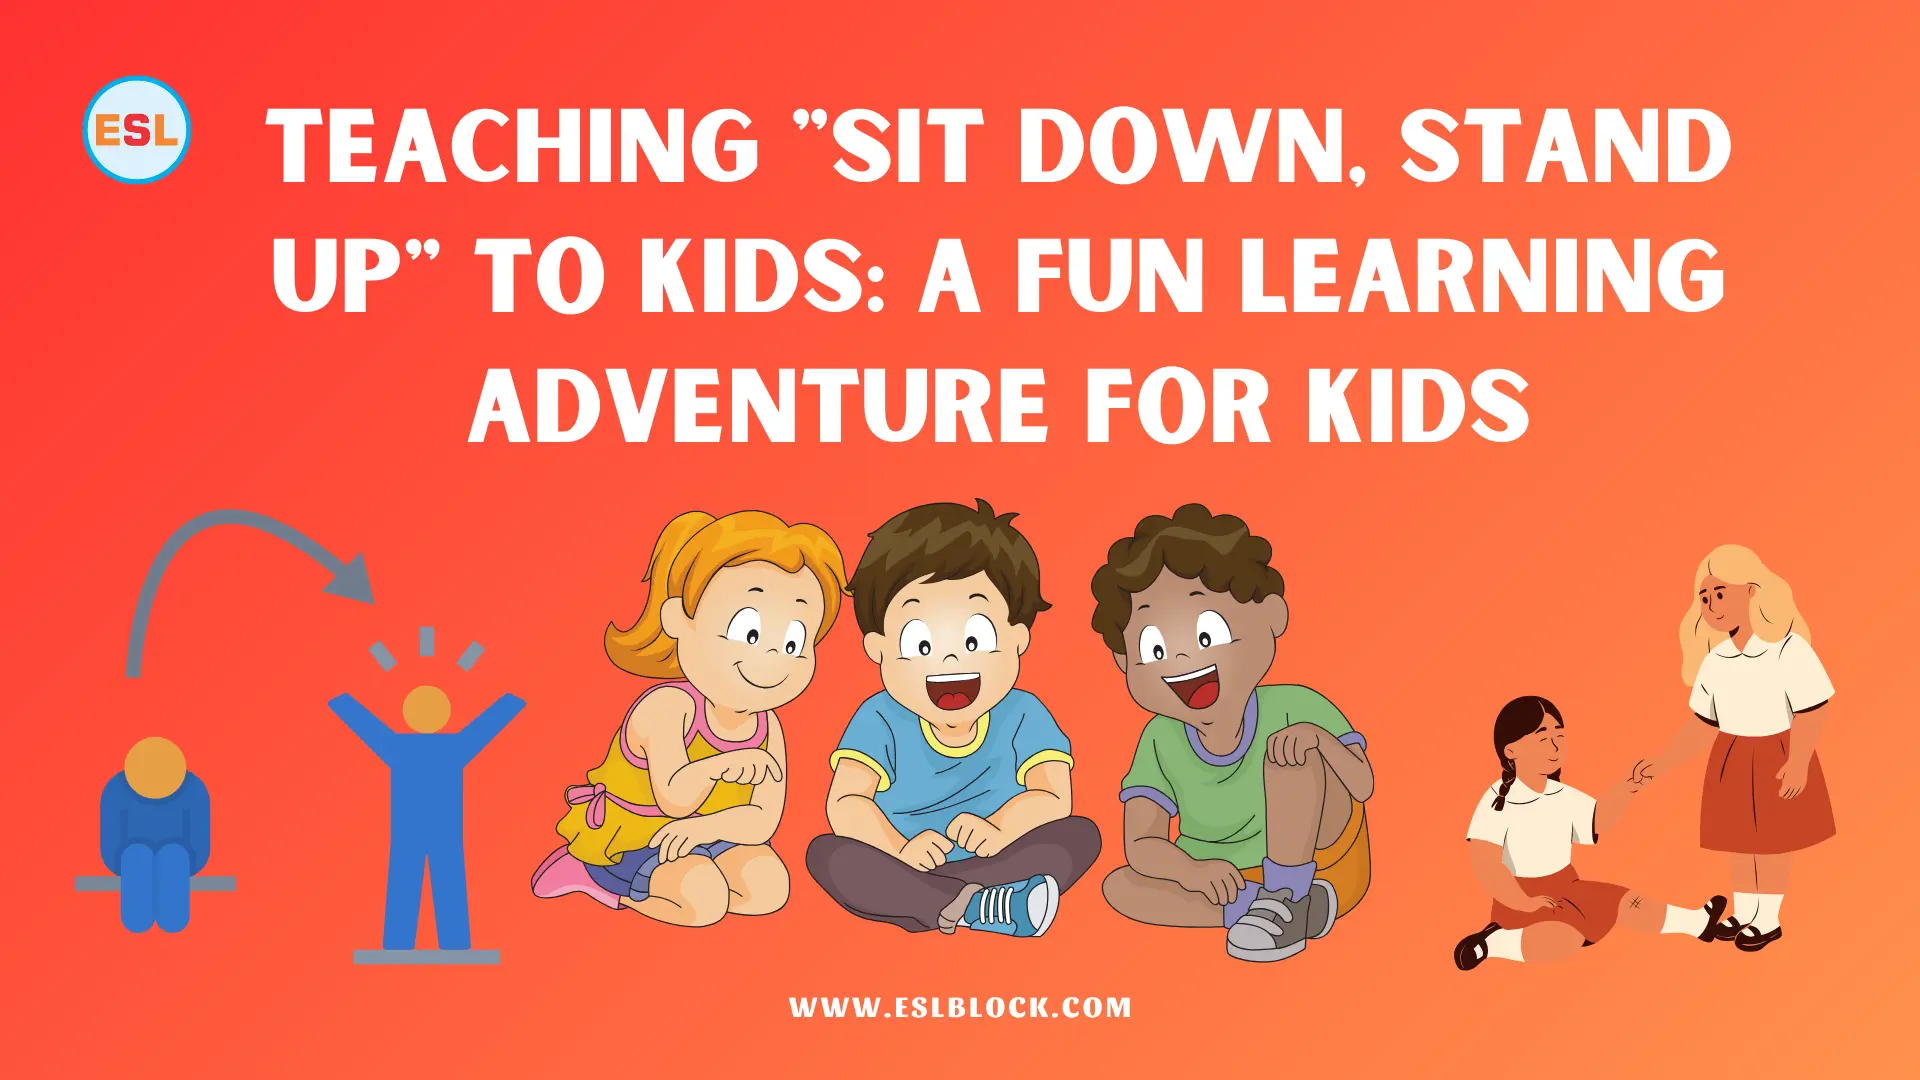 Teaching Sit Down, Stand Up to Kids A Fun Learning Adventure for Kids